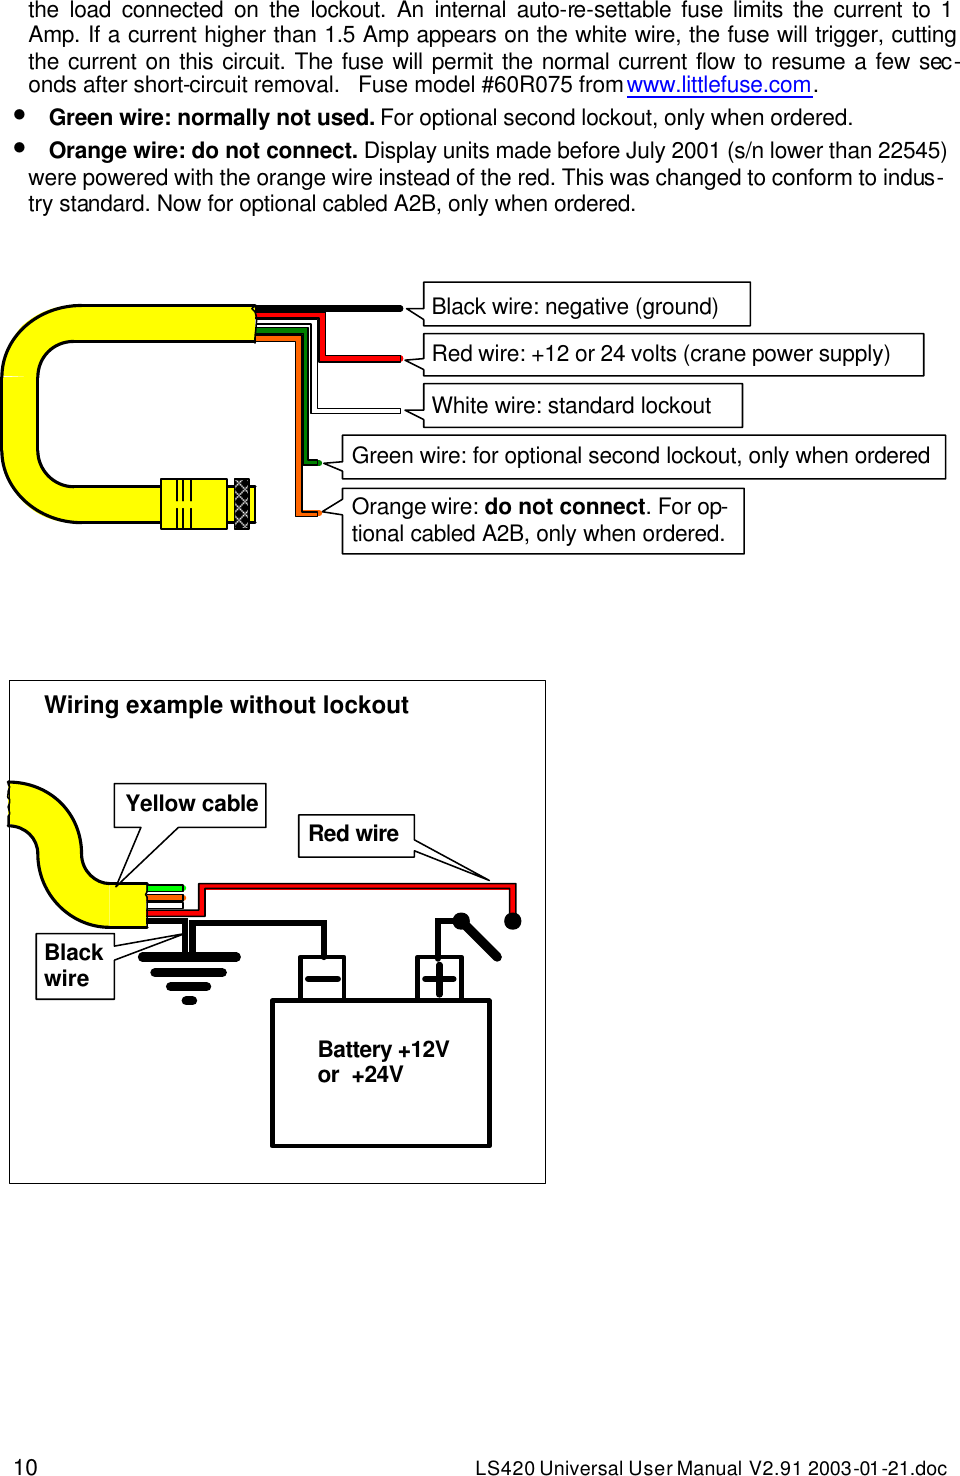 10 LS420 Universal User Manual V2.91 2003-01 -21.doc the load connected on the lockout. An internal auto-re-settable fuse limits the current to 1 Amp. If a current higher than 1.5 Amp appears on the white wire, the fuse will trigger, cutting the current on this circuit. The fuse will permit the normal current flow to resume a few sec-onds after short-circuit removal.   Fuse model #60R075 from www.littlefuse.com. • Green wire: normally not used. For optional second lockout, only when ordered. • Orange wire: do not connect. Display units made before July 2001 (s/n lower than 22545) were powered with the orange wire instead of the red. This was changed to conform to indus-try standard. Now for optional cabled A2B, only when ordered.                                                 Black wire: negative (ground) Red wire: +12 or 24 volts (crane power supply) White wire: standard lockout Green wire: for optional second lockout, only when ordered  Orange wire: do not connect. For op-tional cabled A2B, only when ordered. Wiring example without lockout  Battery +12V or  +24V Black wire Red wire Yellow cable